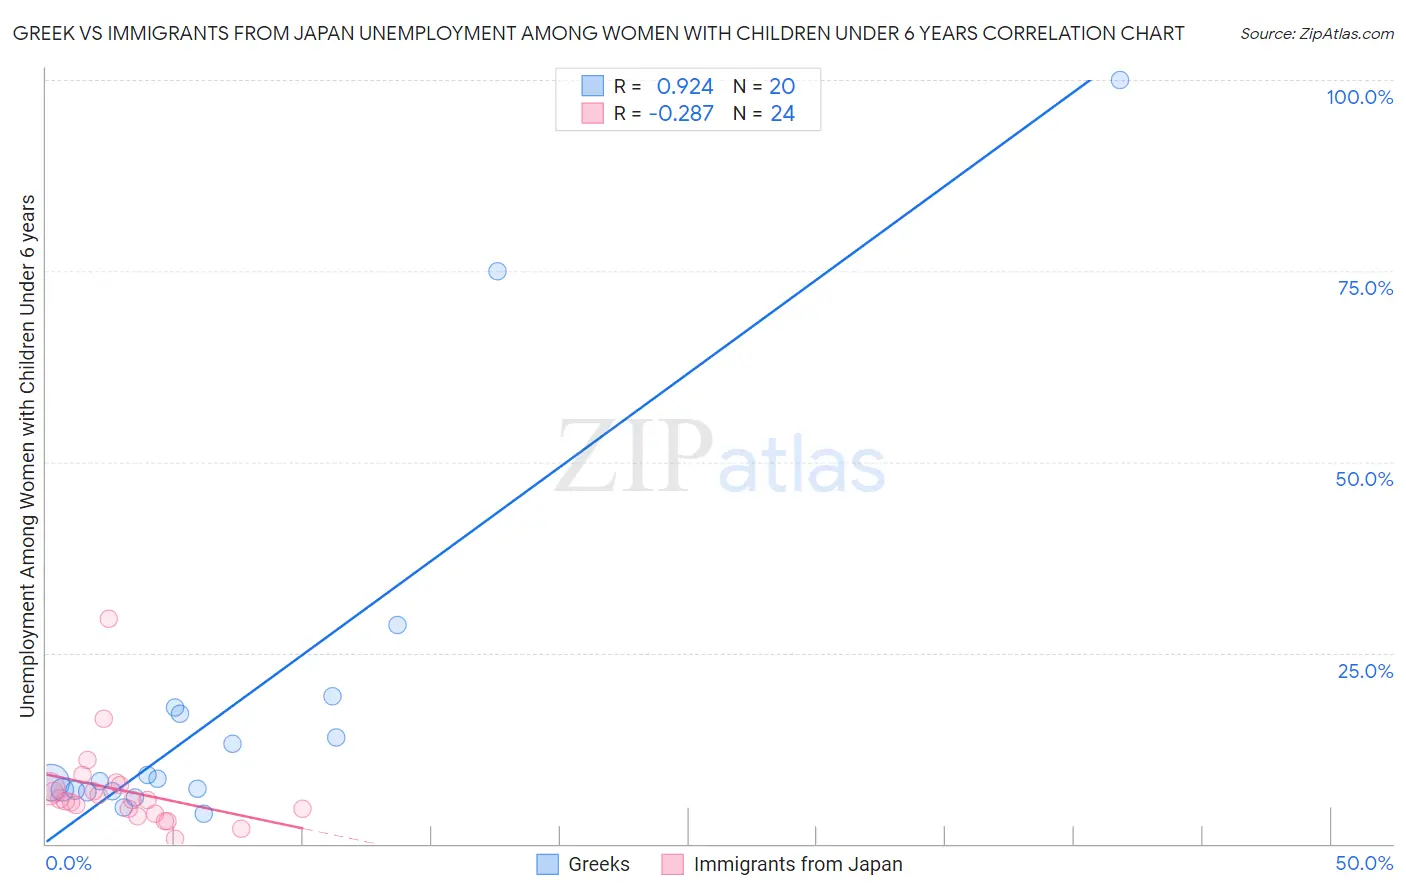 Greek vs Immigrants from Japan Unemployment Among Women with Children Under 6 years